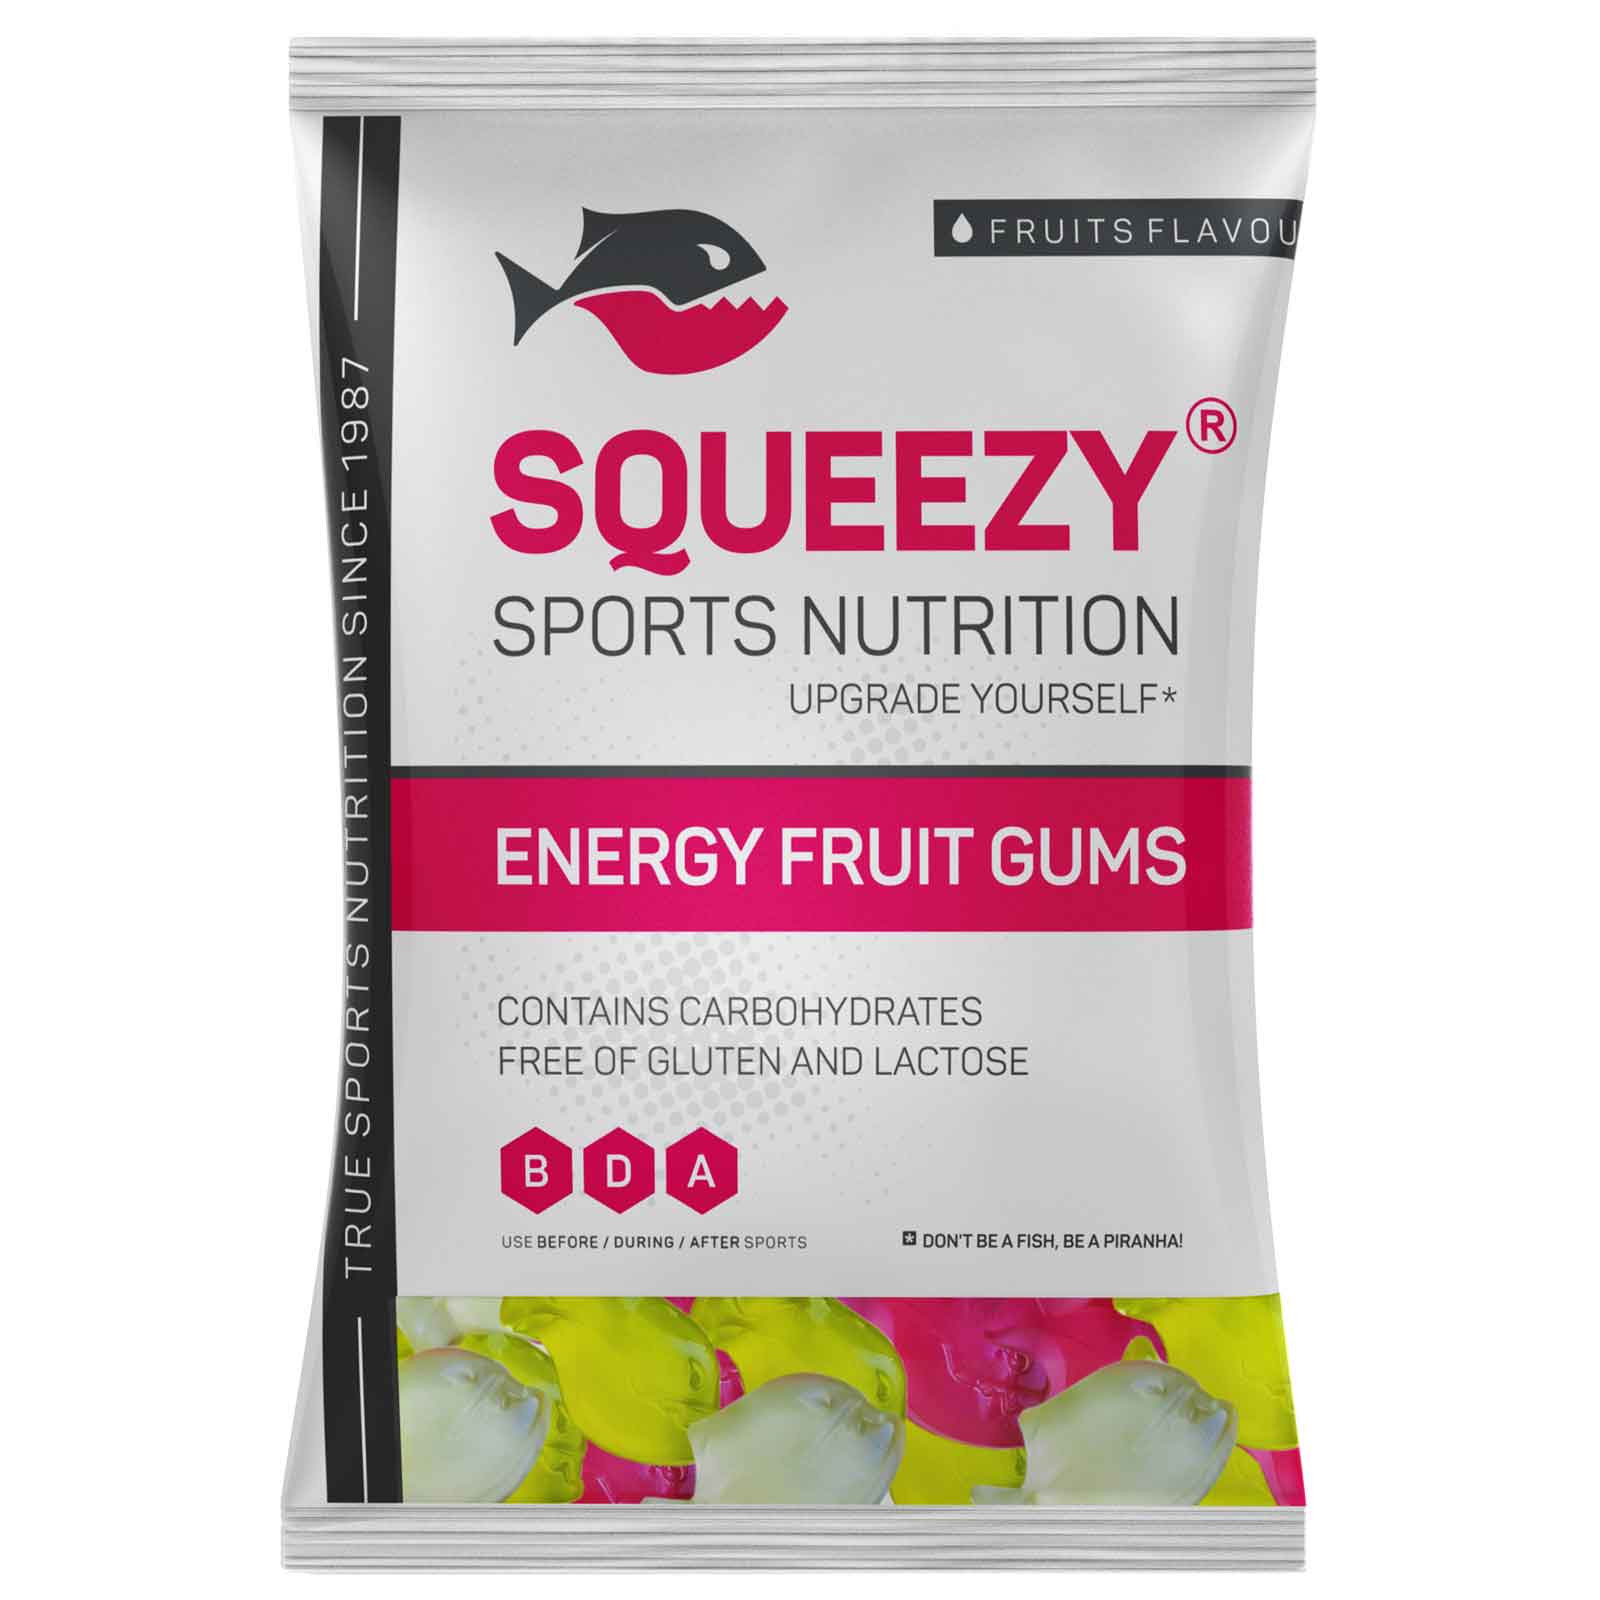 Productfoto van Squeezy Energy Fruit Gums with Carbohydrates - 100g